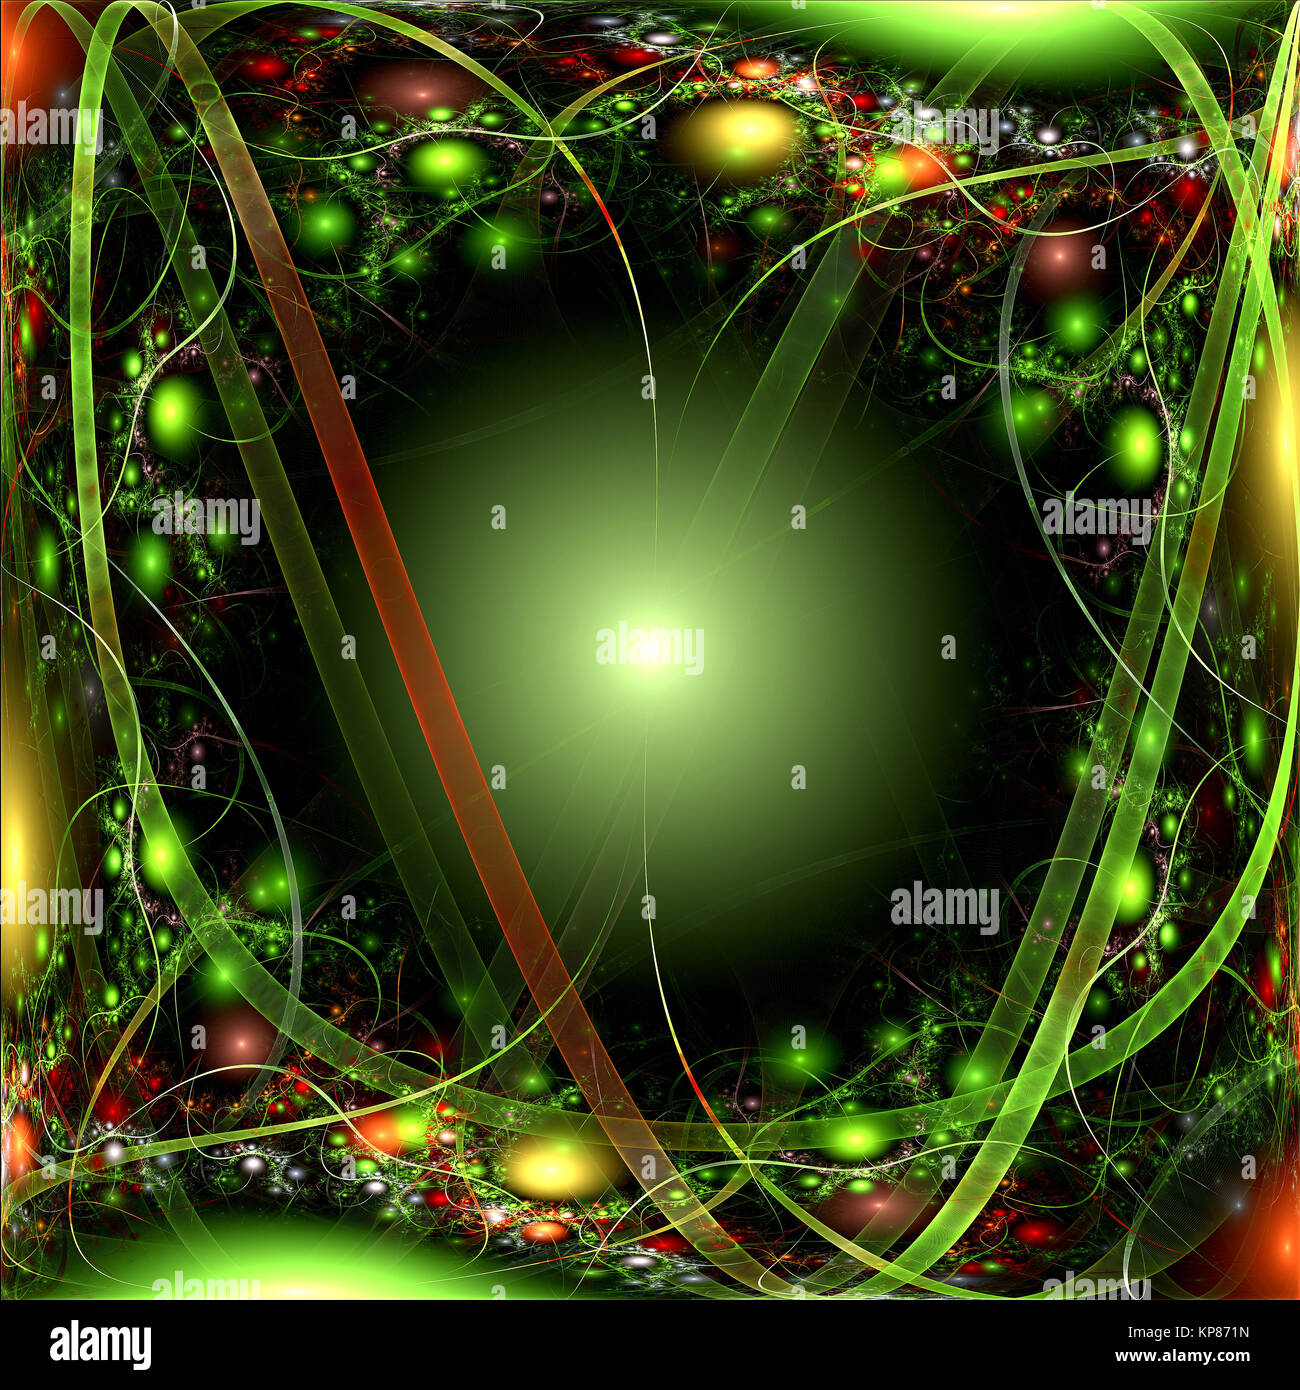 Green abstract festive frame computer-generated image Stock Photo